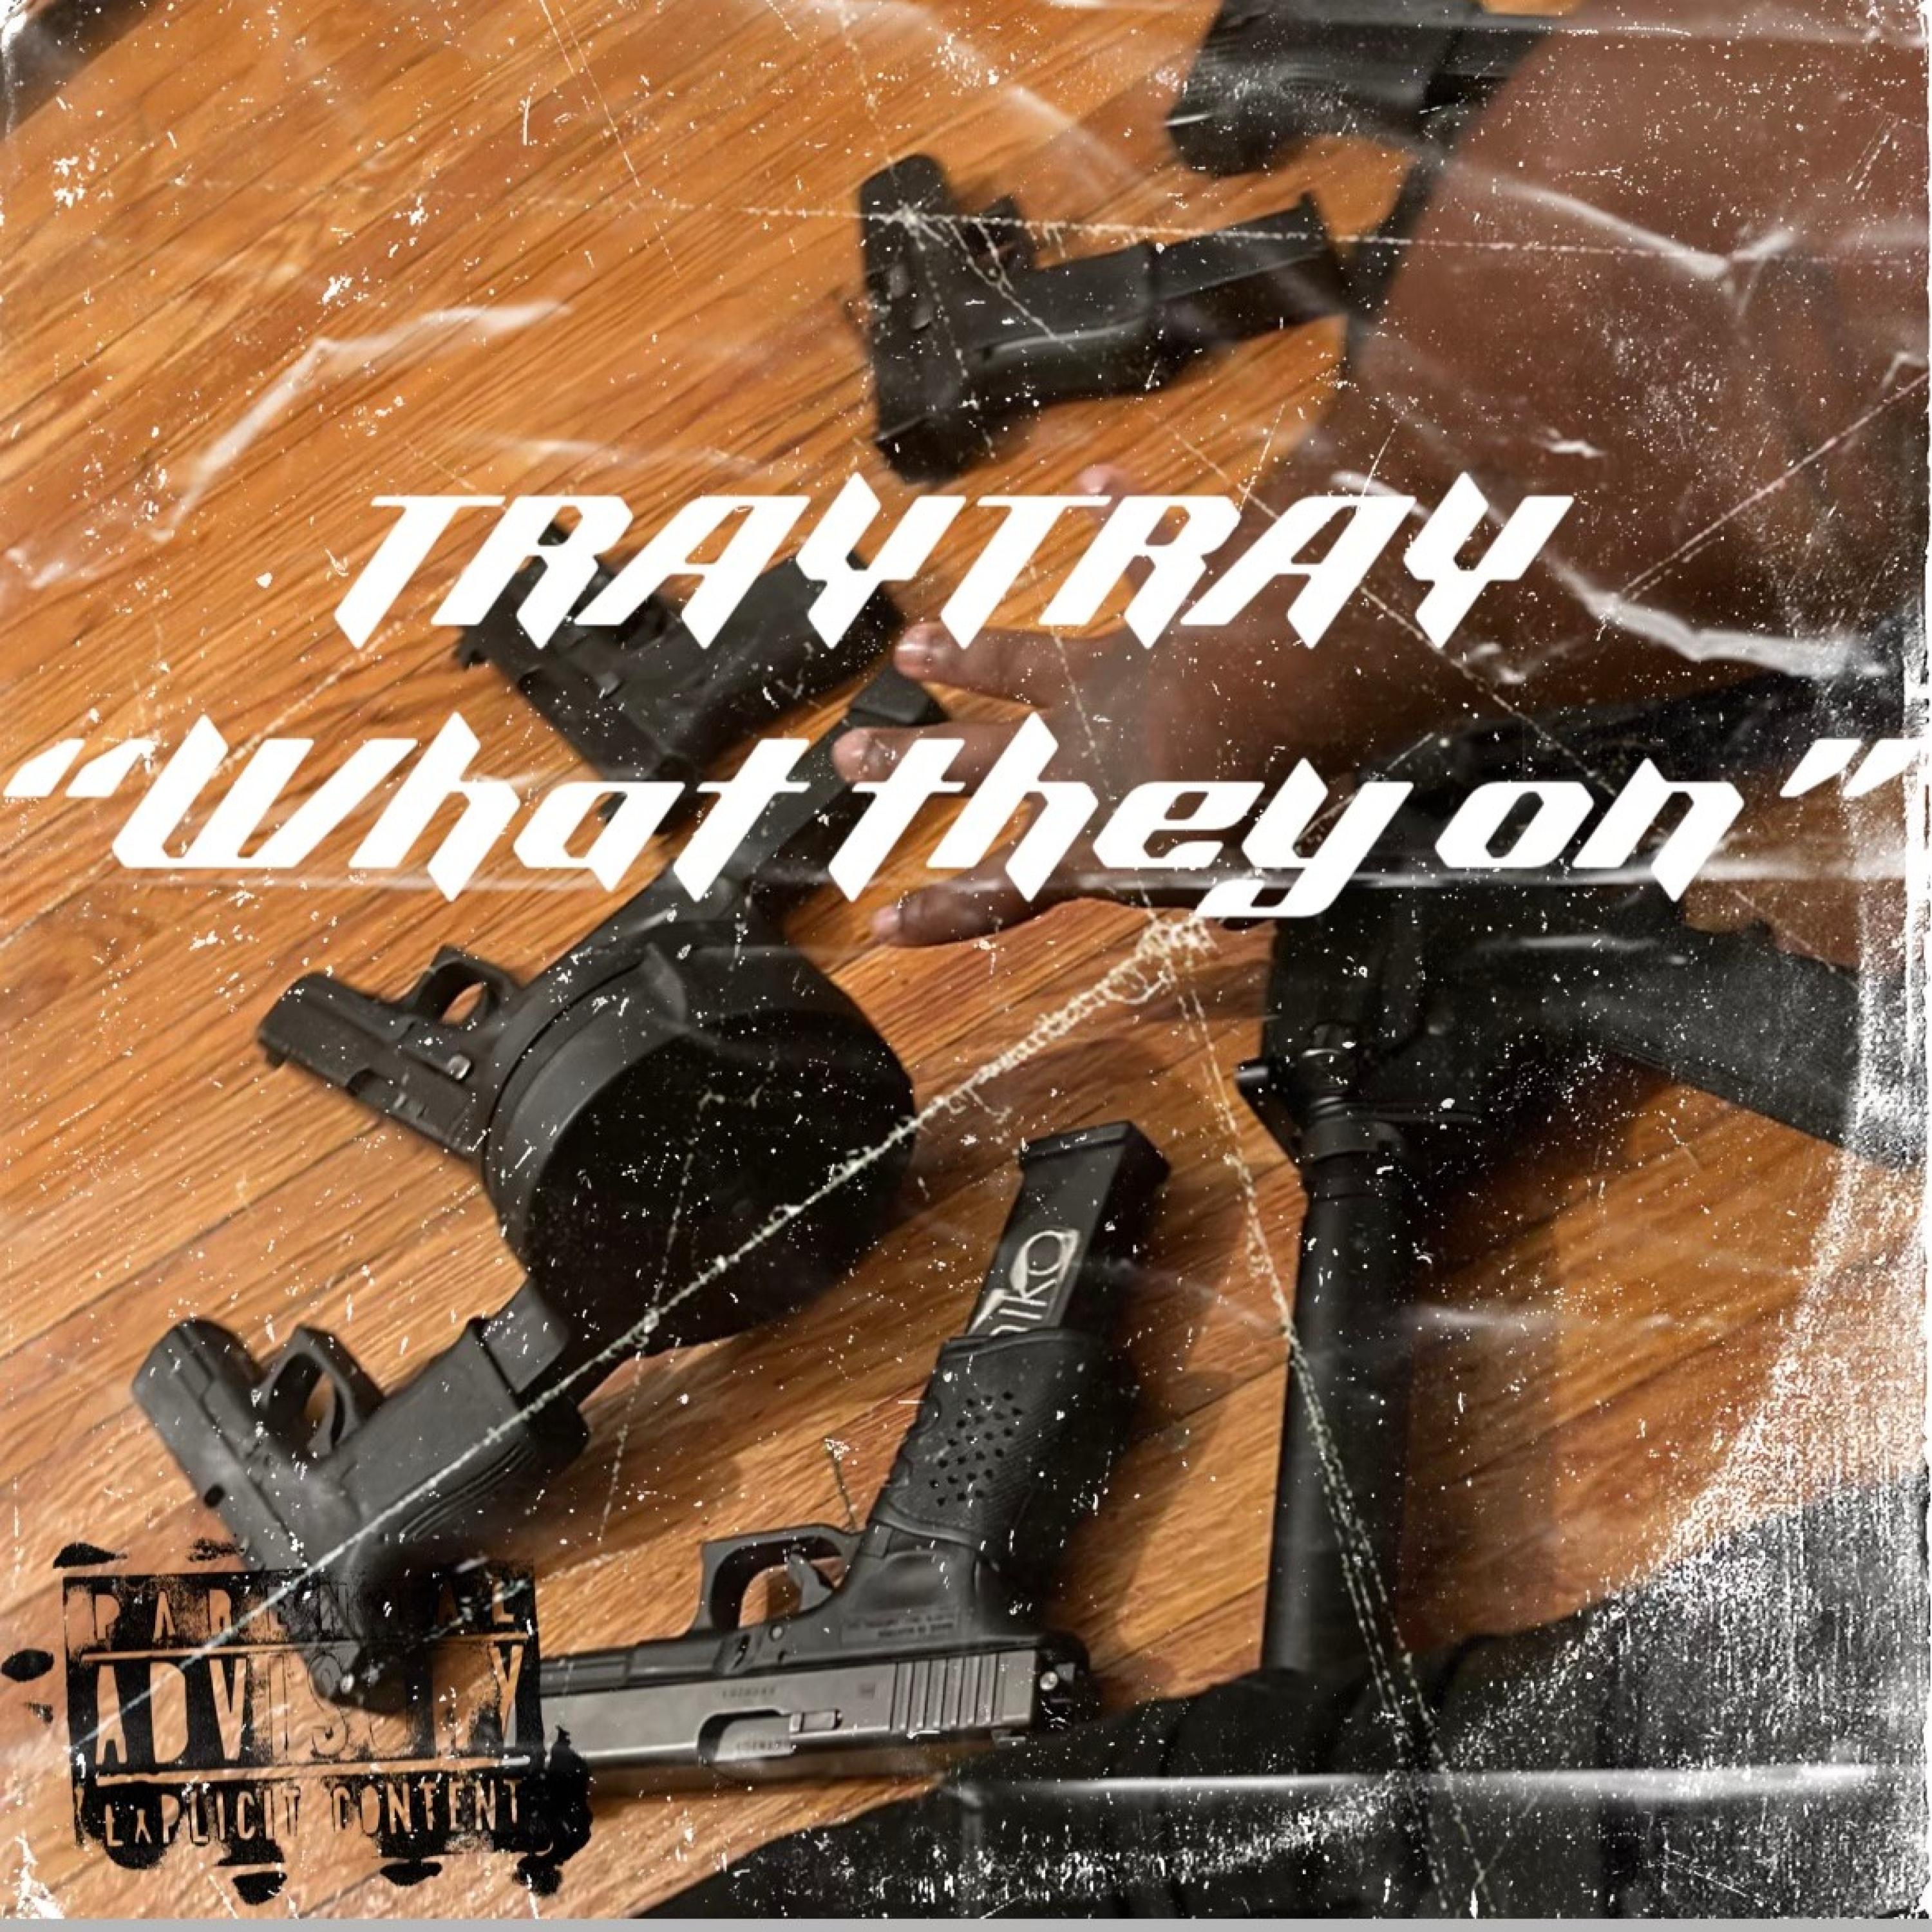 Tray Tray - What They On